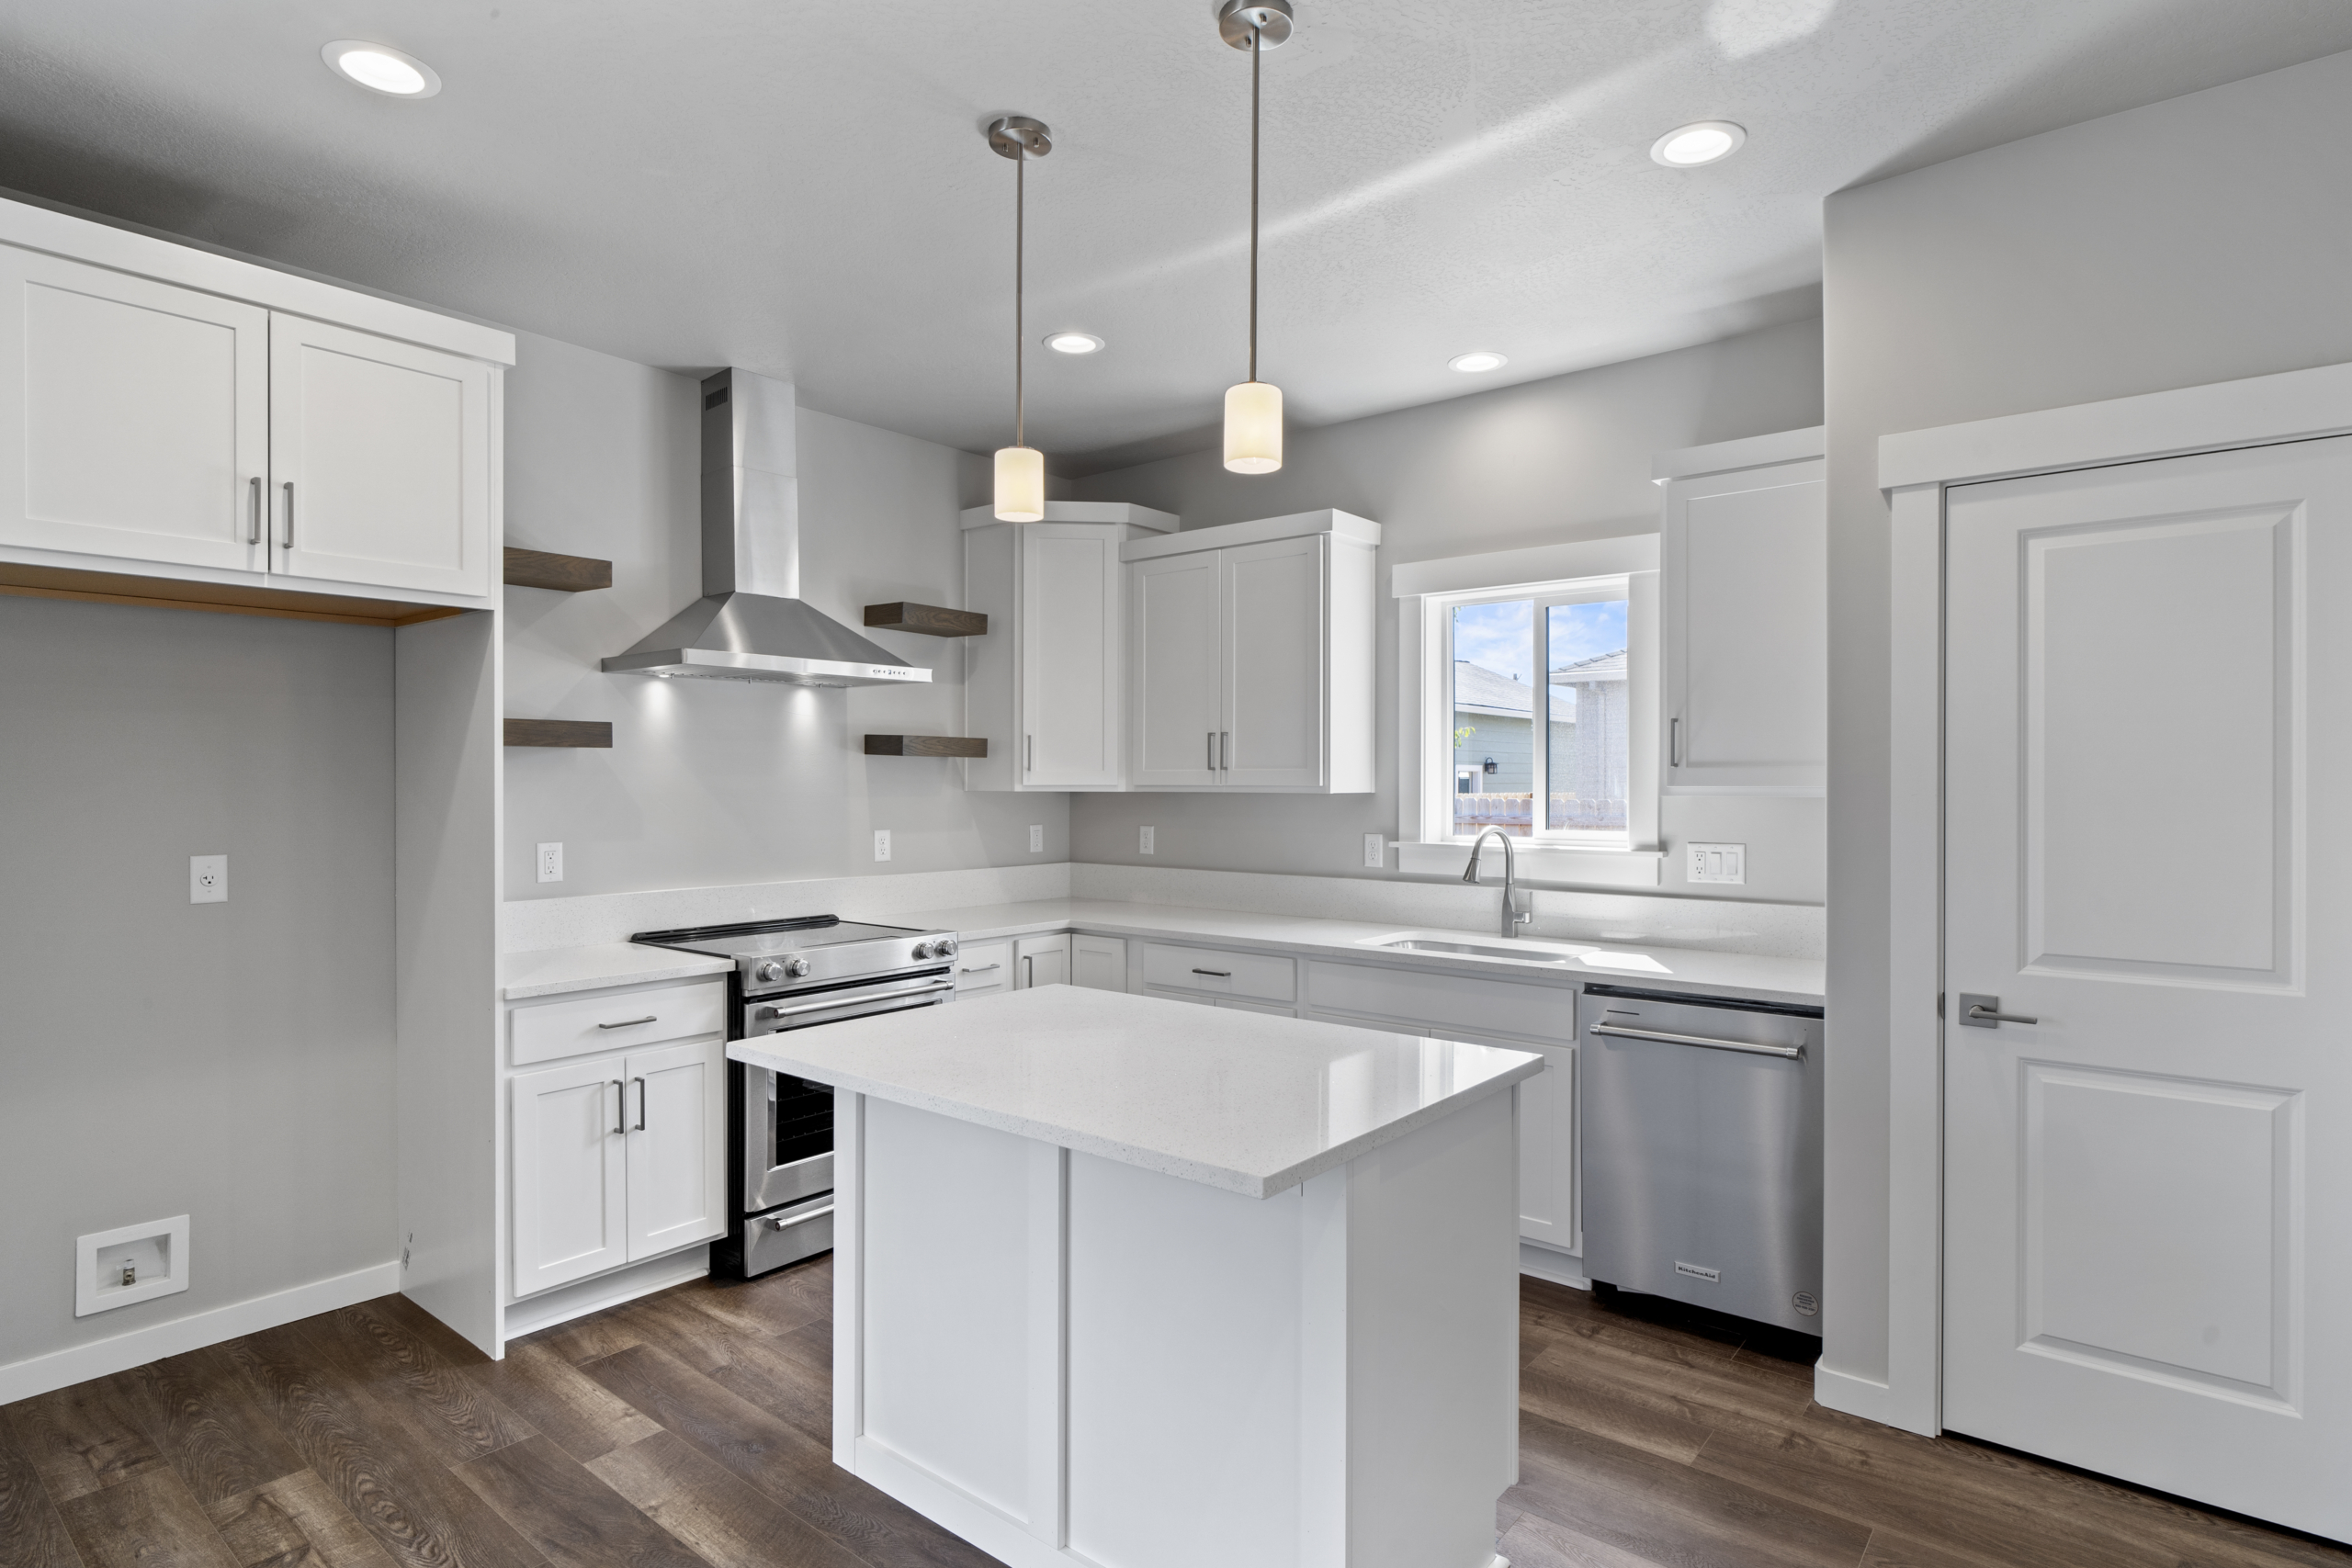 An inviting kitchen with sleek white countertops and modern stainless steel appliances.